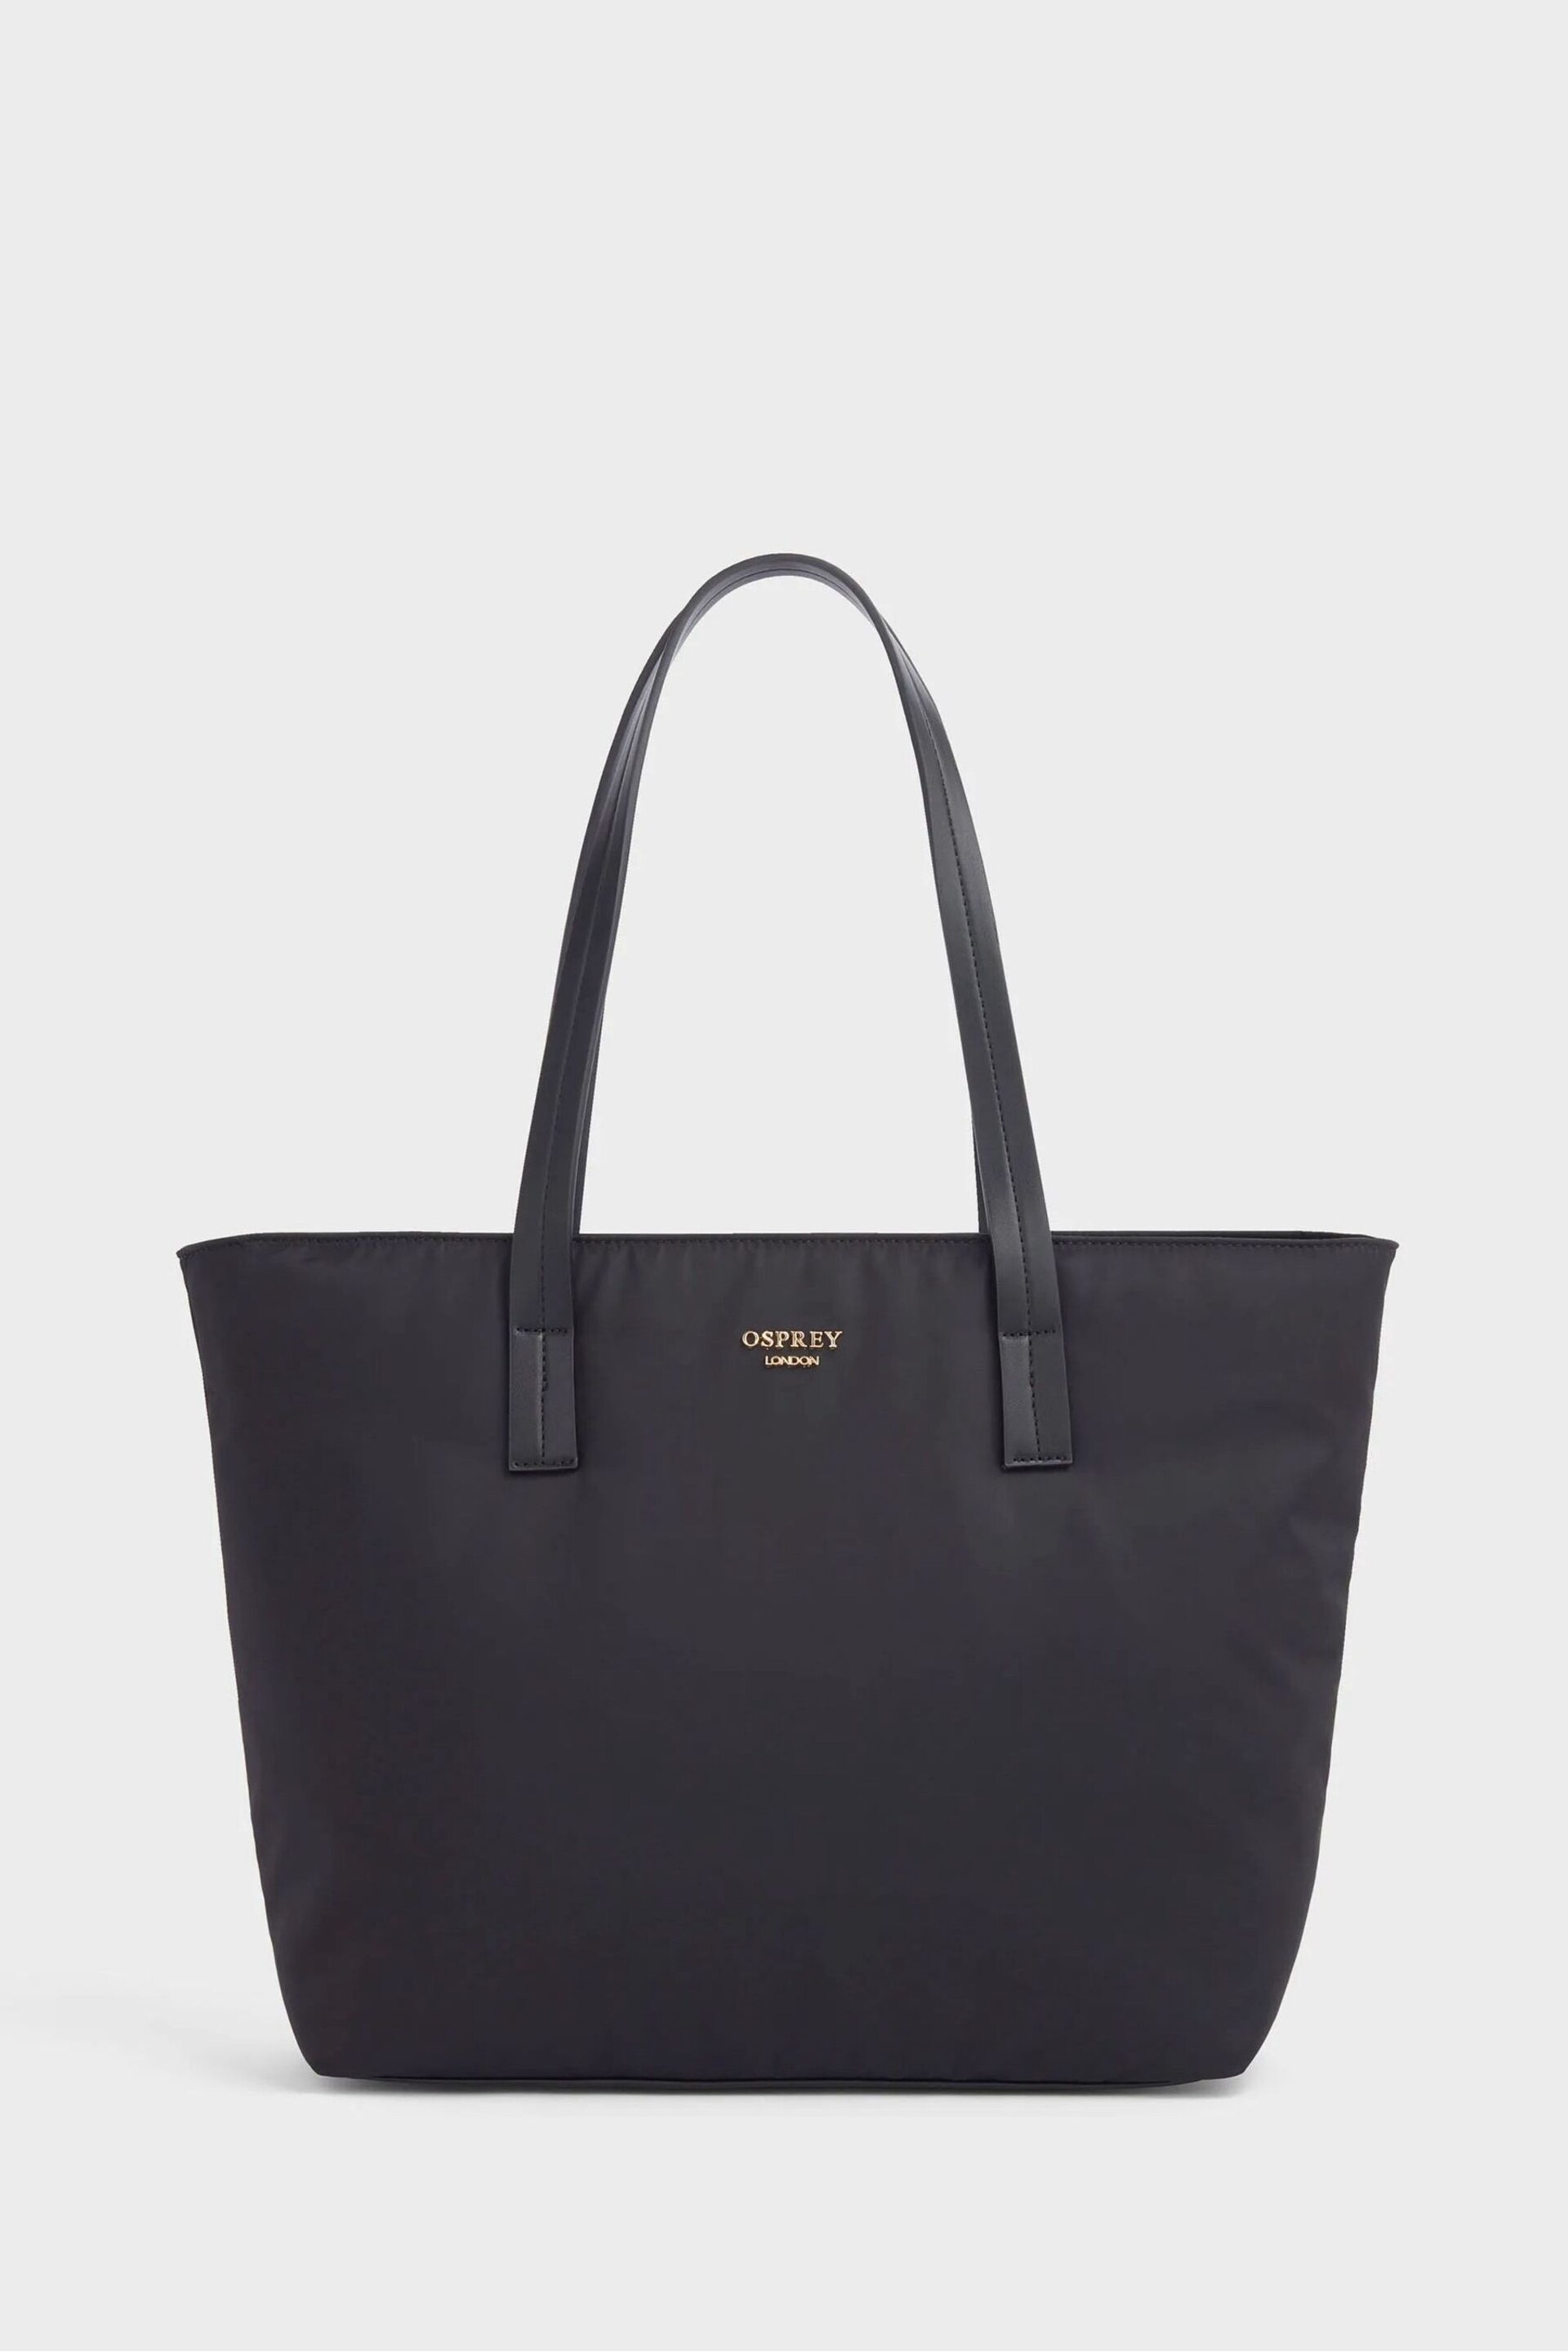 OSPREY LONDON The Wanderer Nylon Tote Bag With RFID Protection - Image 1 of 4